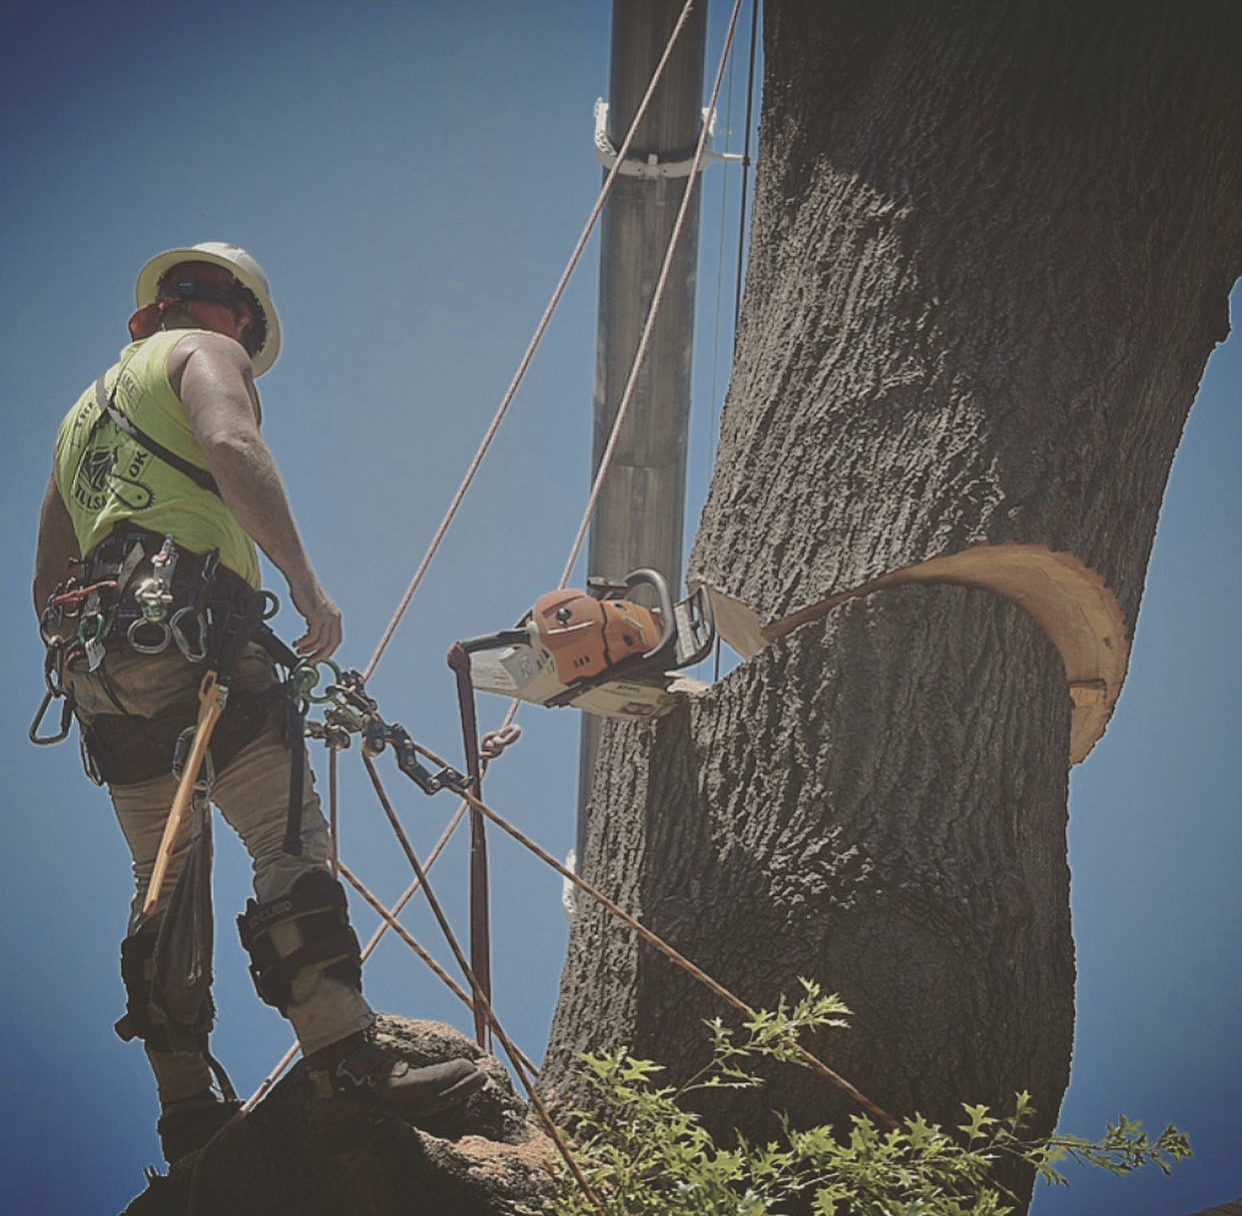 Three arborists climbing in ropes to trim a large tree